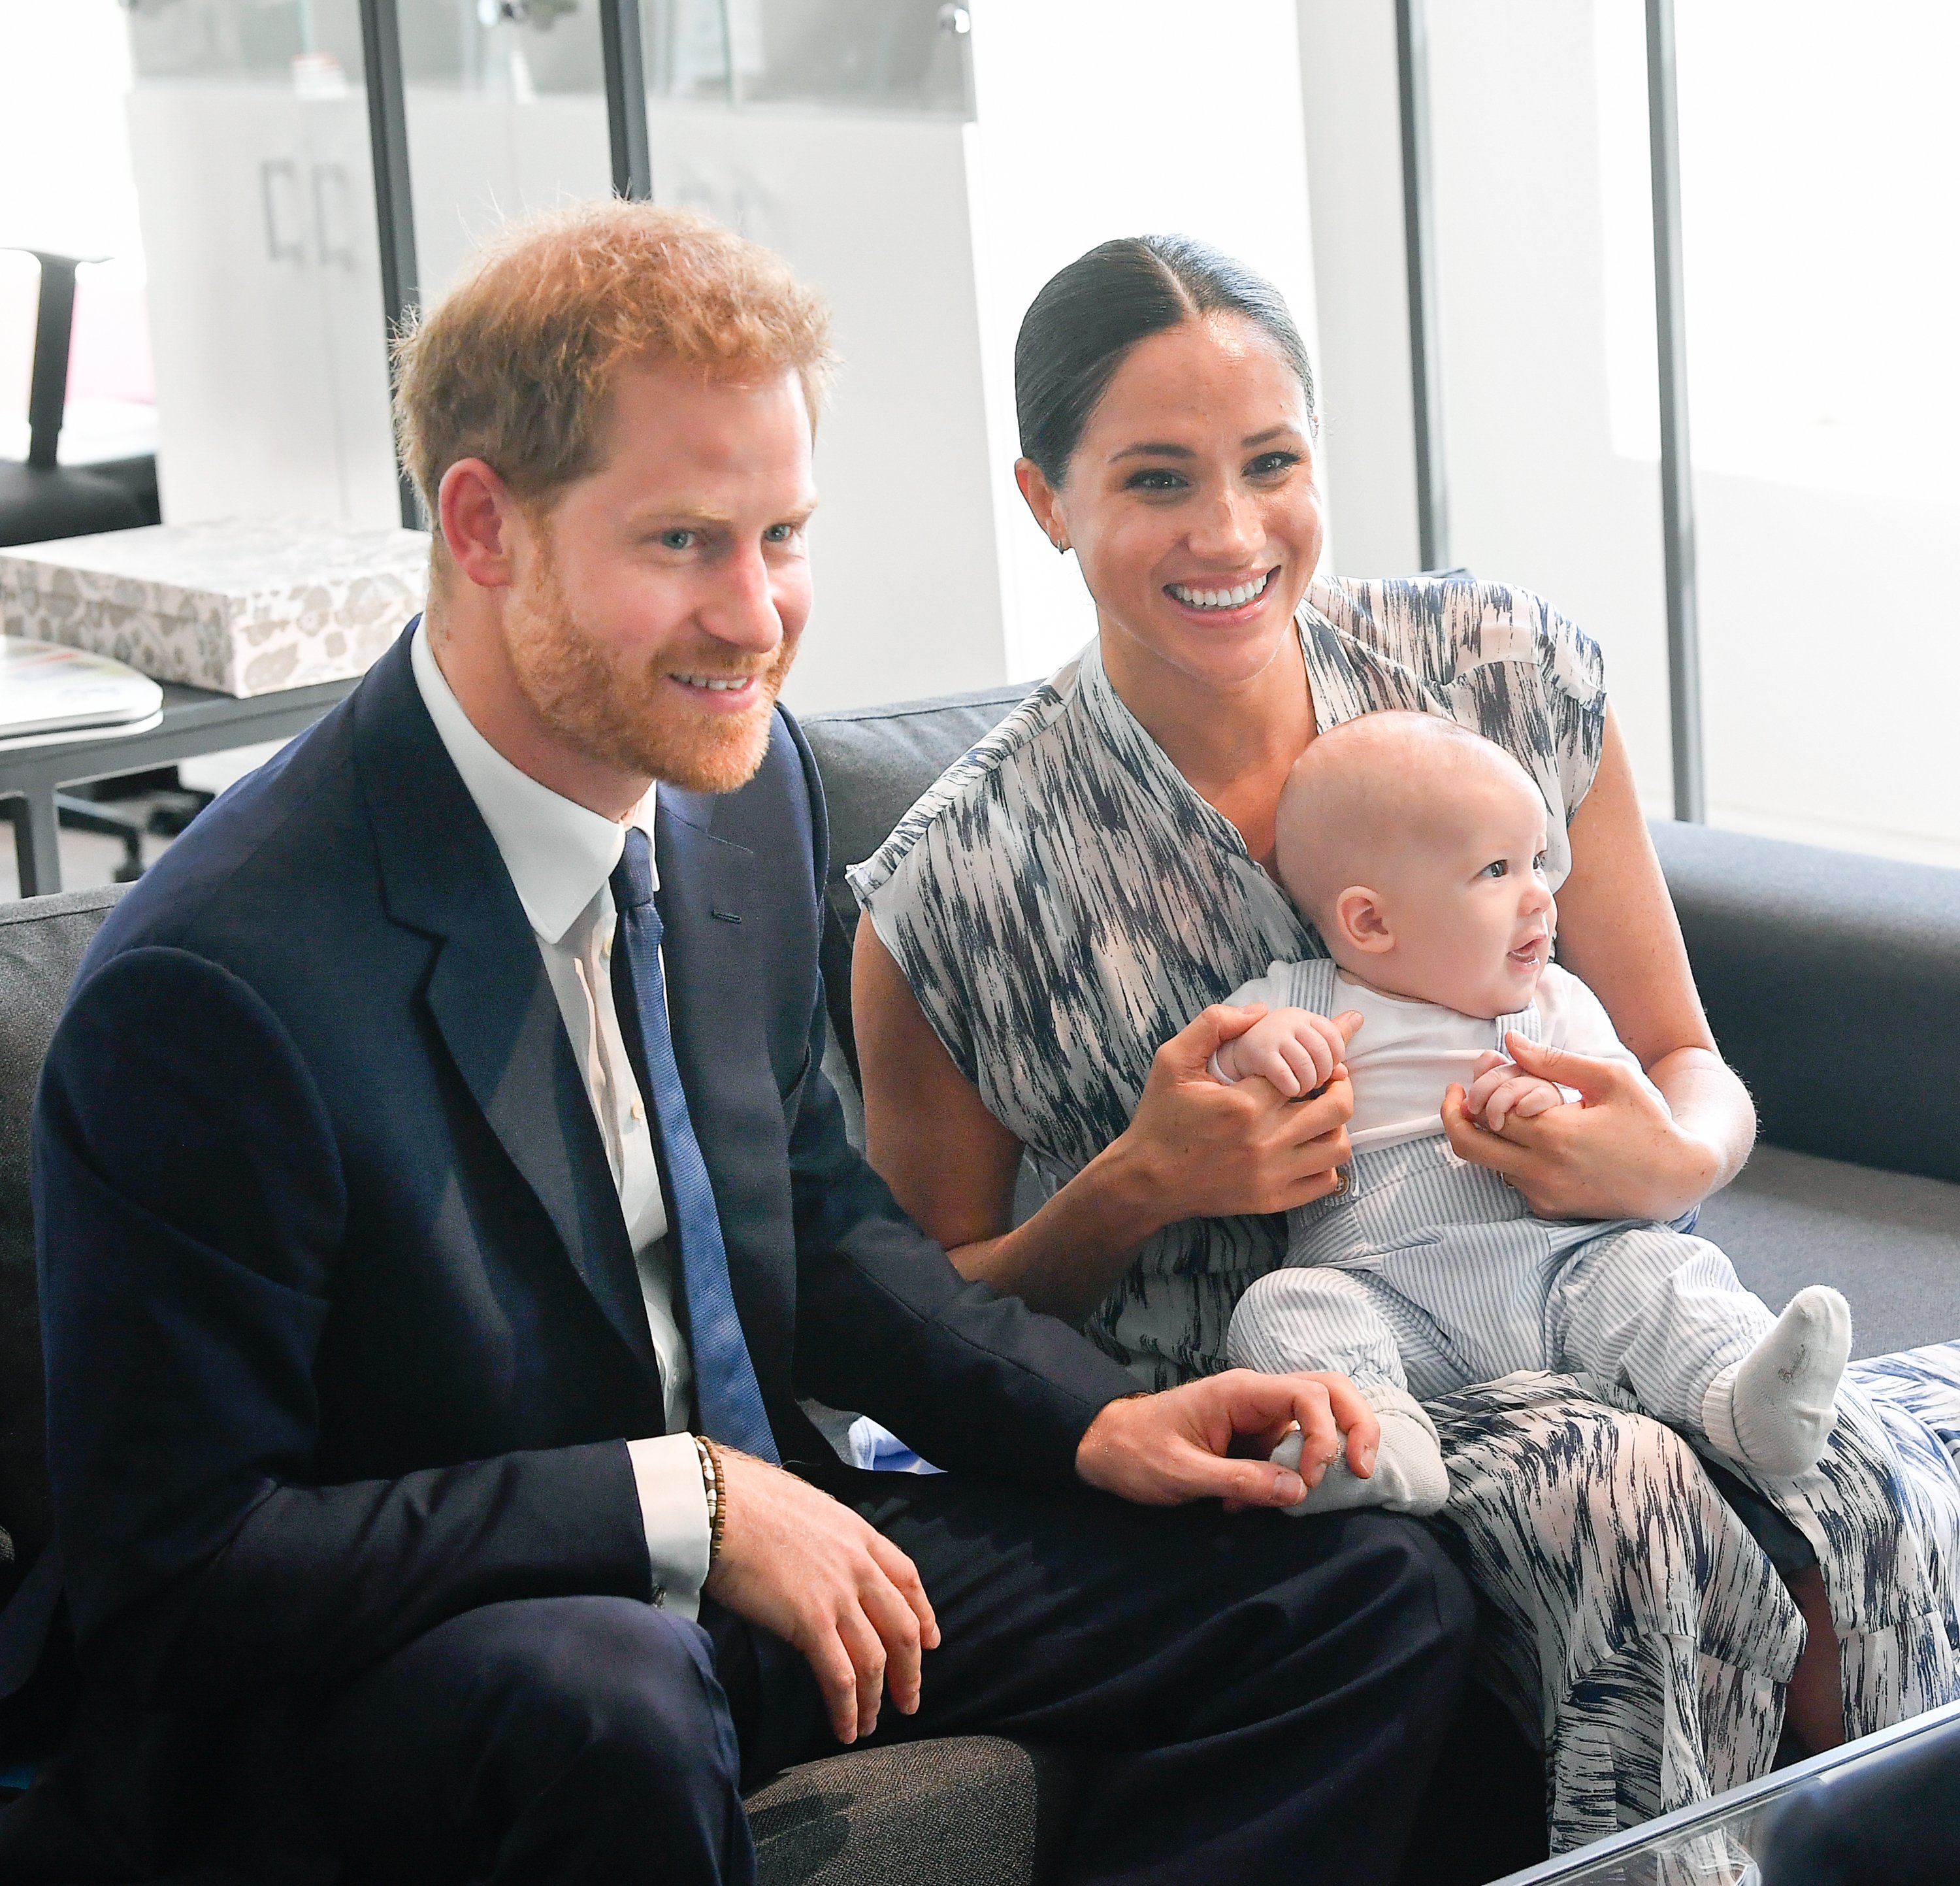 Prince Harry pictured with his wife Meghan Markle and their young son Archie Mountbatten-Windsor during their royal tour of South Africa on September 25, 2019 in Cape Town, South Africa ┃Source: Getty Images